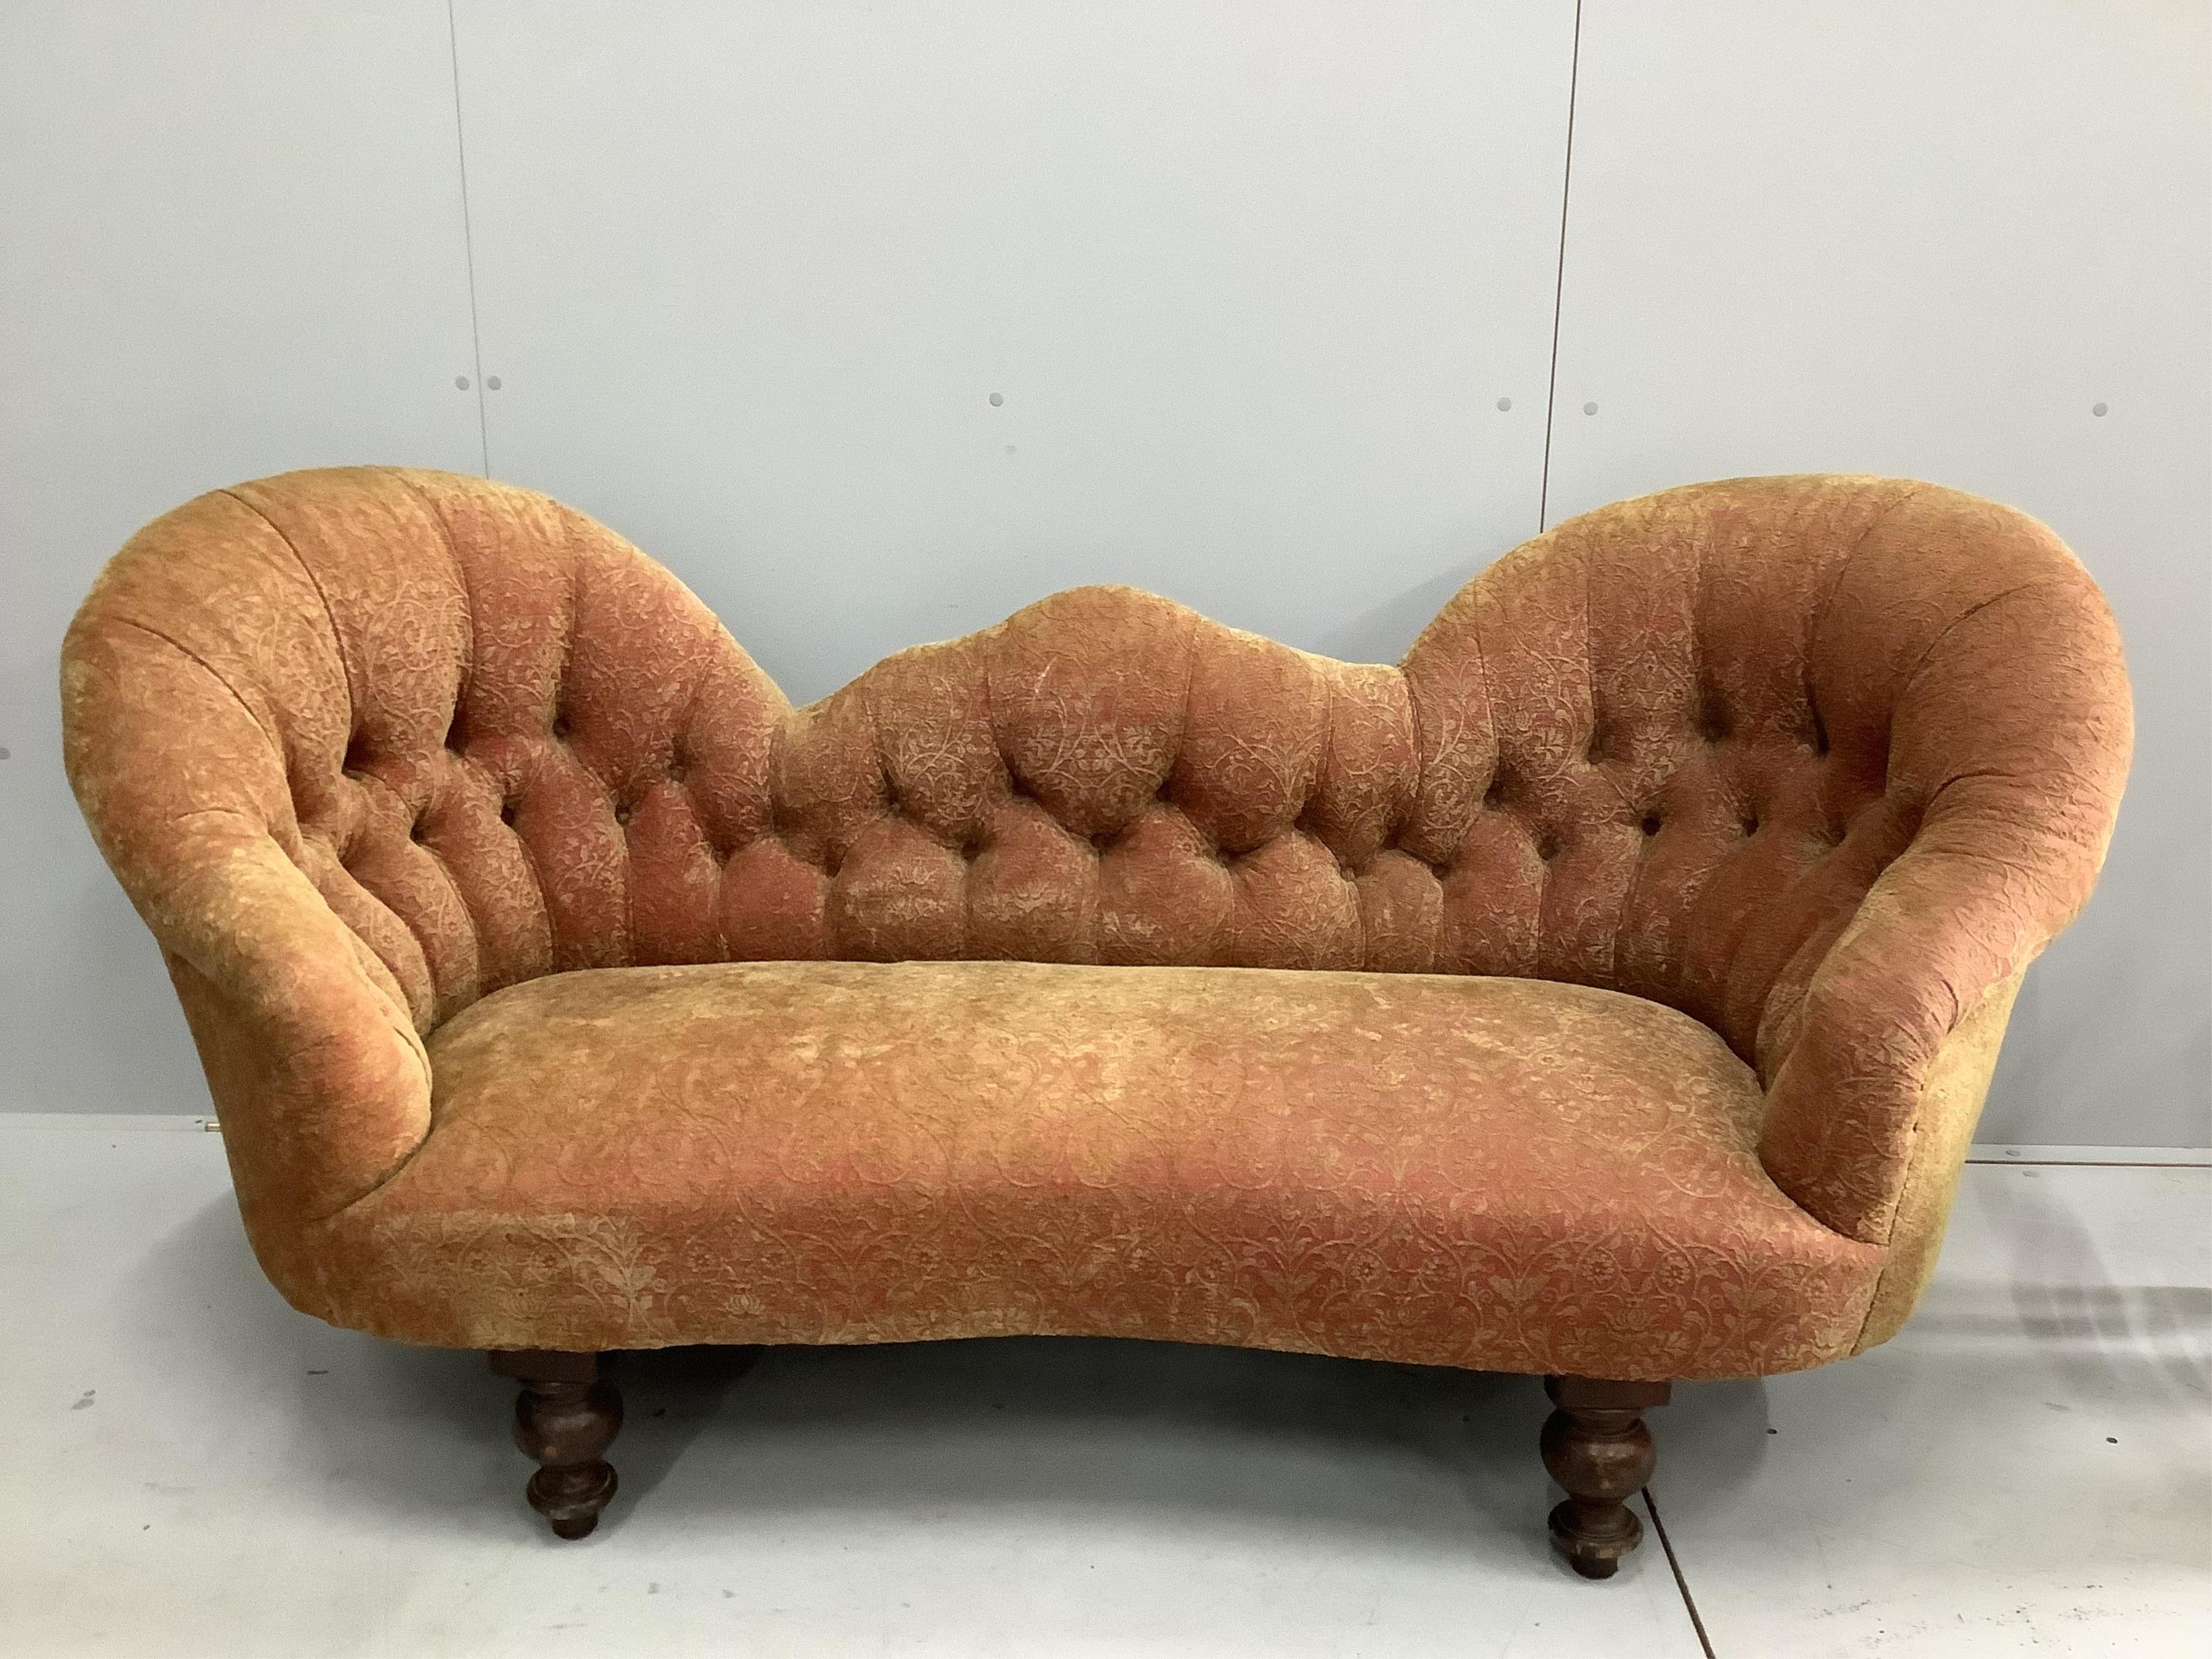 A Victorian double spoon back settee recently reupholstered in buttoned patterned red and gold fabric, width 180cm, depth 72cm, height 83cm. Condition - good